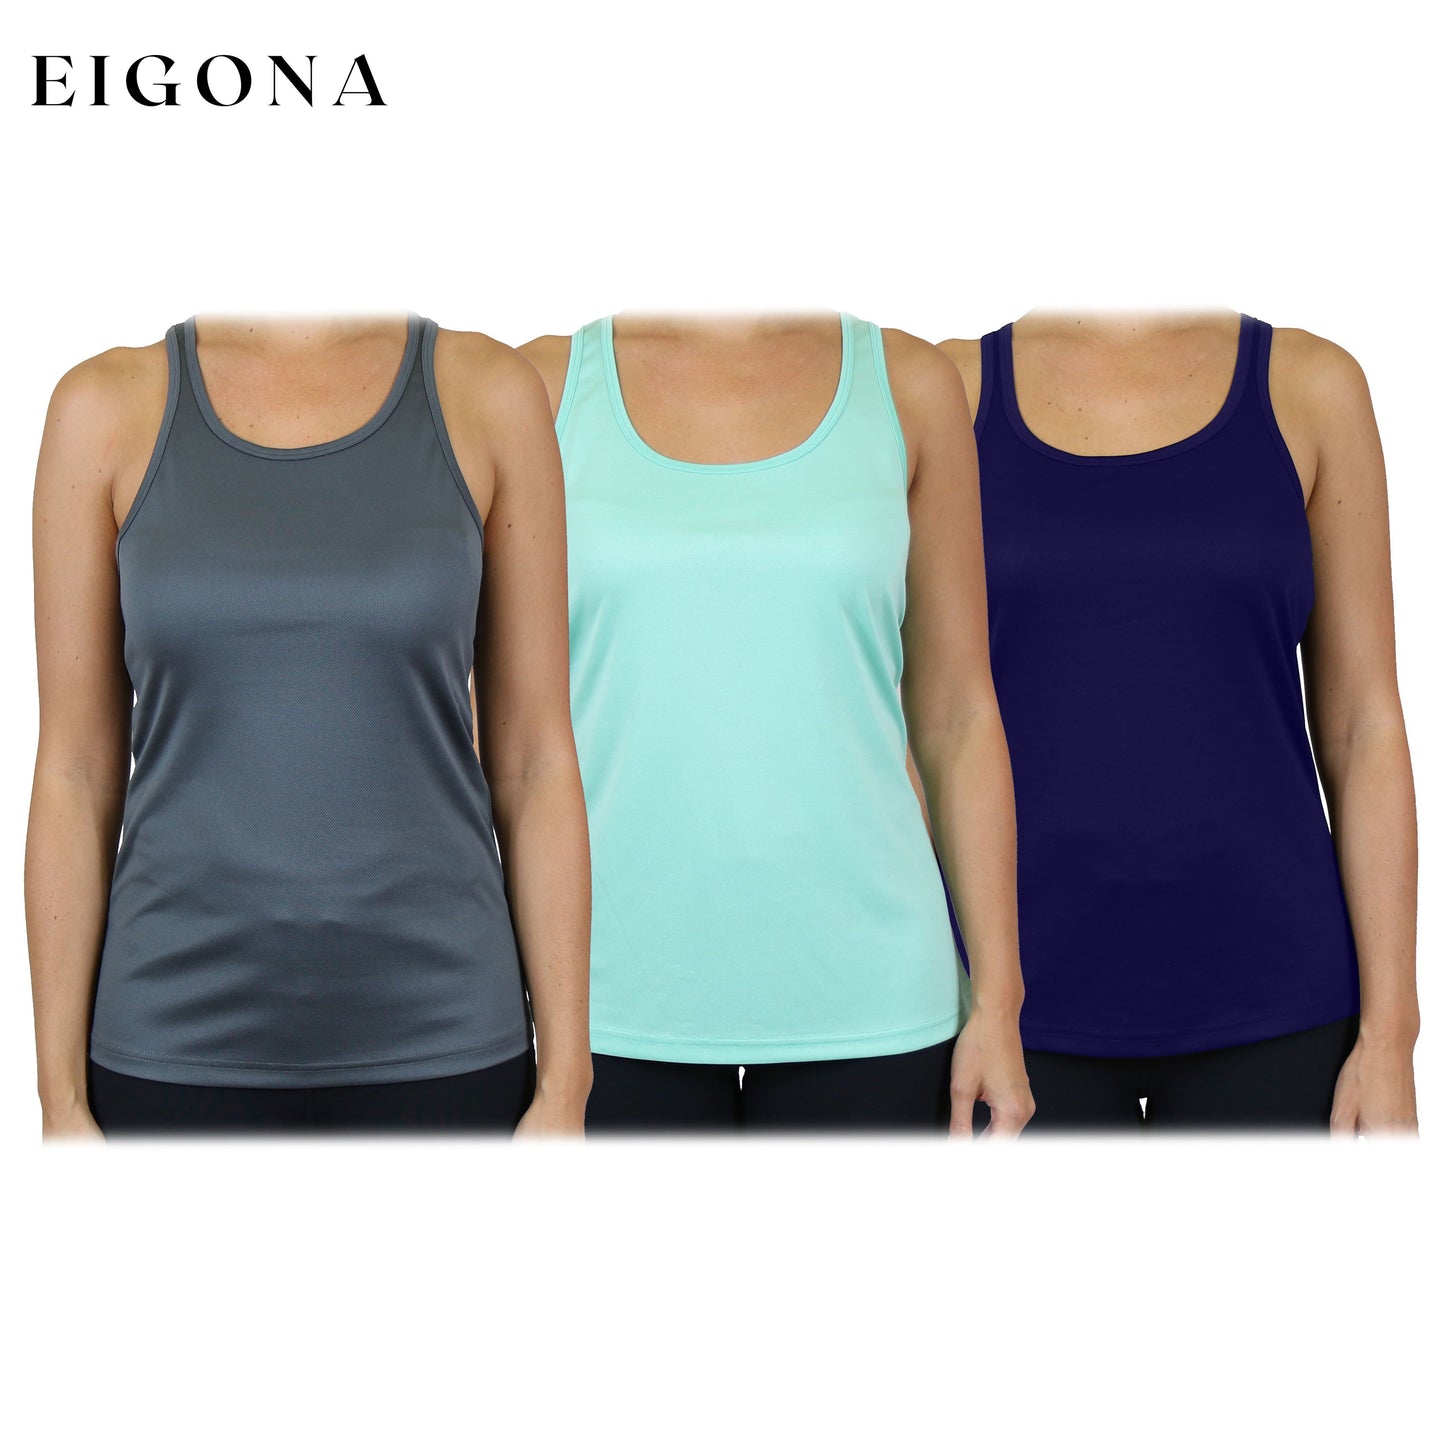 3-Pack: Women's Moisture Wicking Racerback Tank Charcoal Mint Navy clothes refund_fee:1200 tops